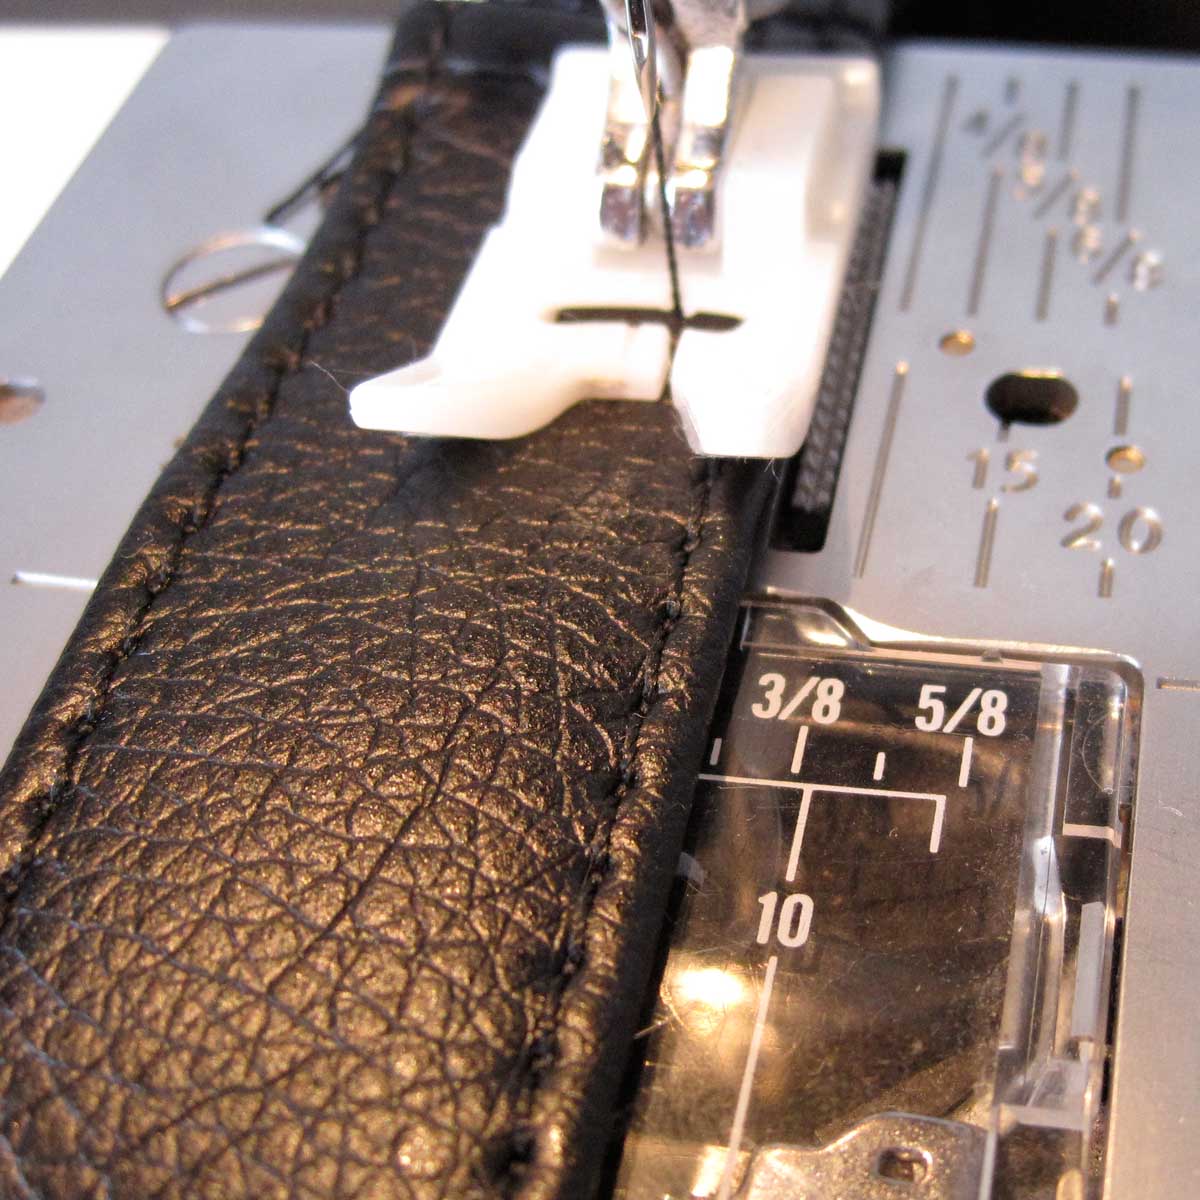 Emmaline Bags: Sewing Patterns and Purse Supplies: Make Your Own Vinyl/Leather Look Handbag ...